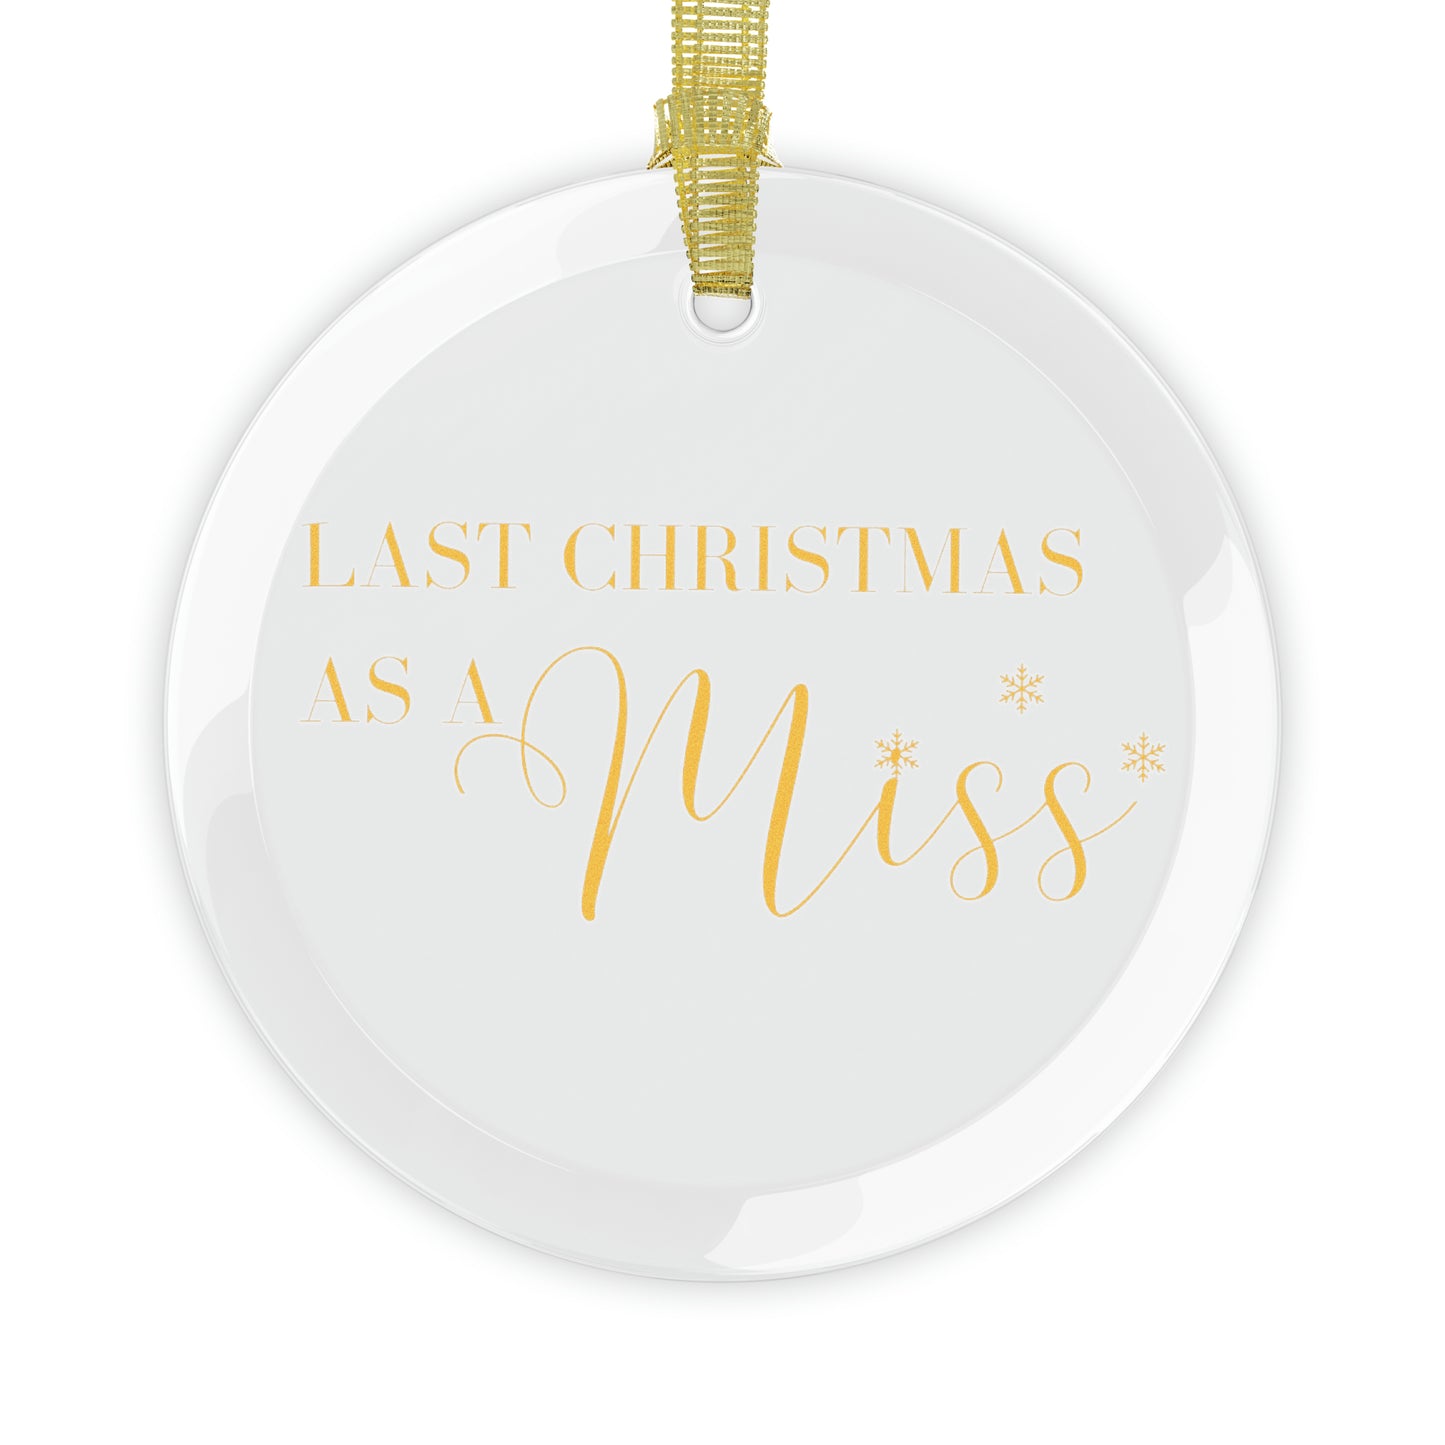 Last Christmas as a Miss Glass Ornaments, Future Mrs, Engagement Ornament, Gift for Bride, Bridal Gift